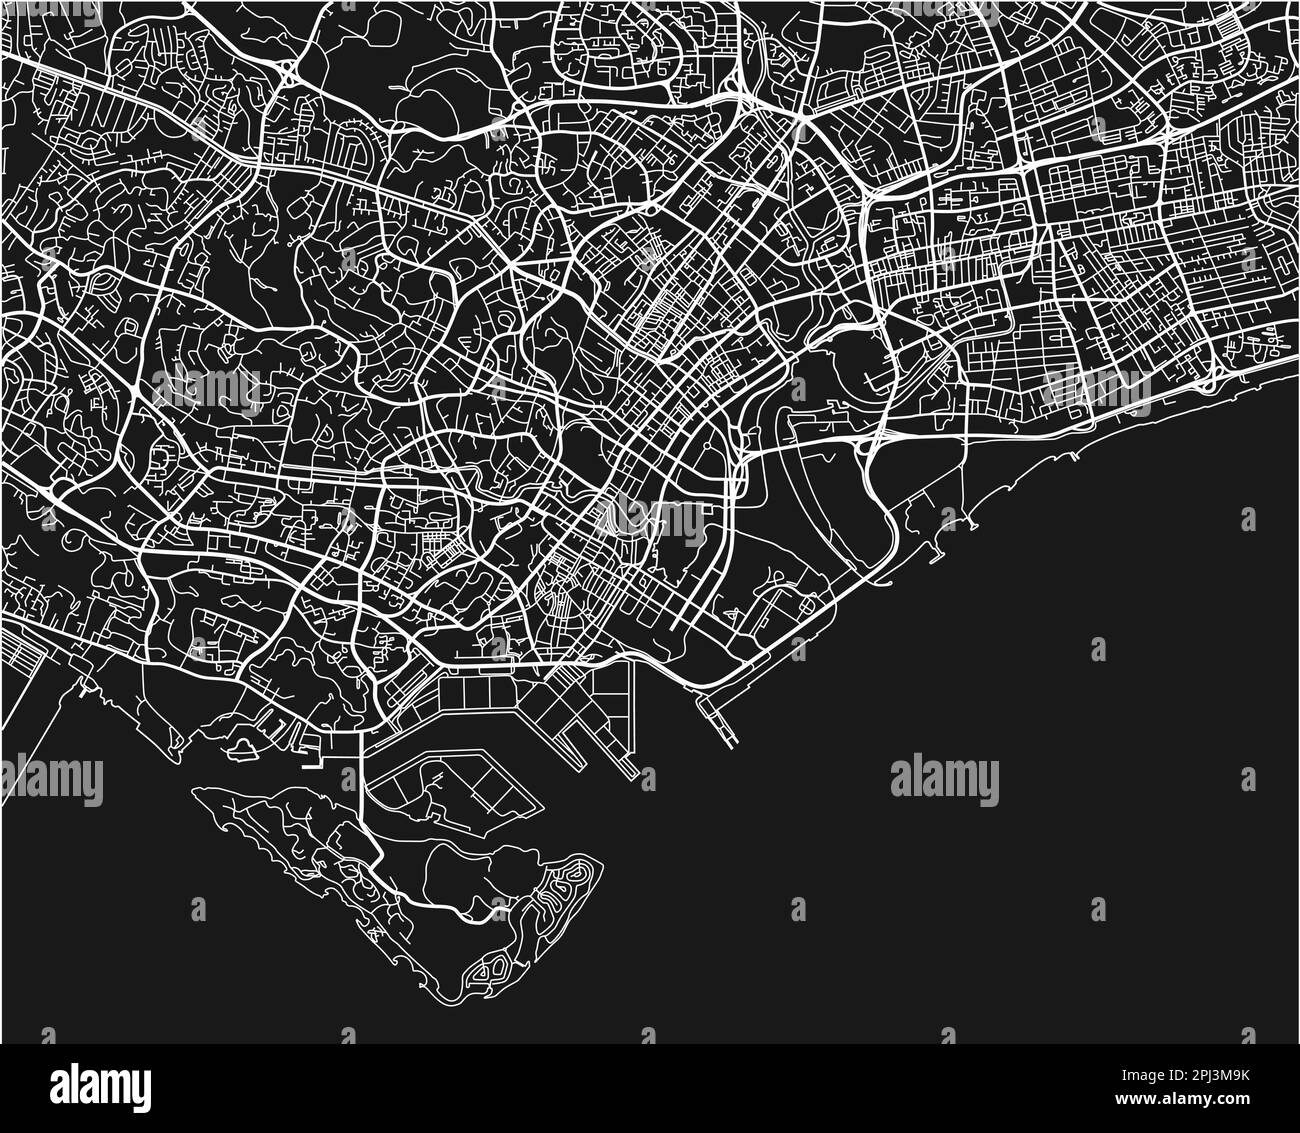 Black and white vector city map of Singapore with well organized separated layers. Stock Vector